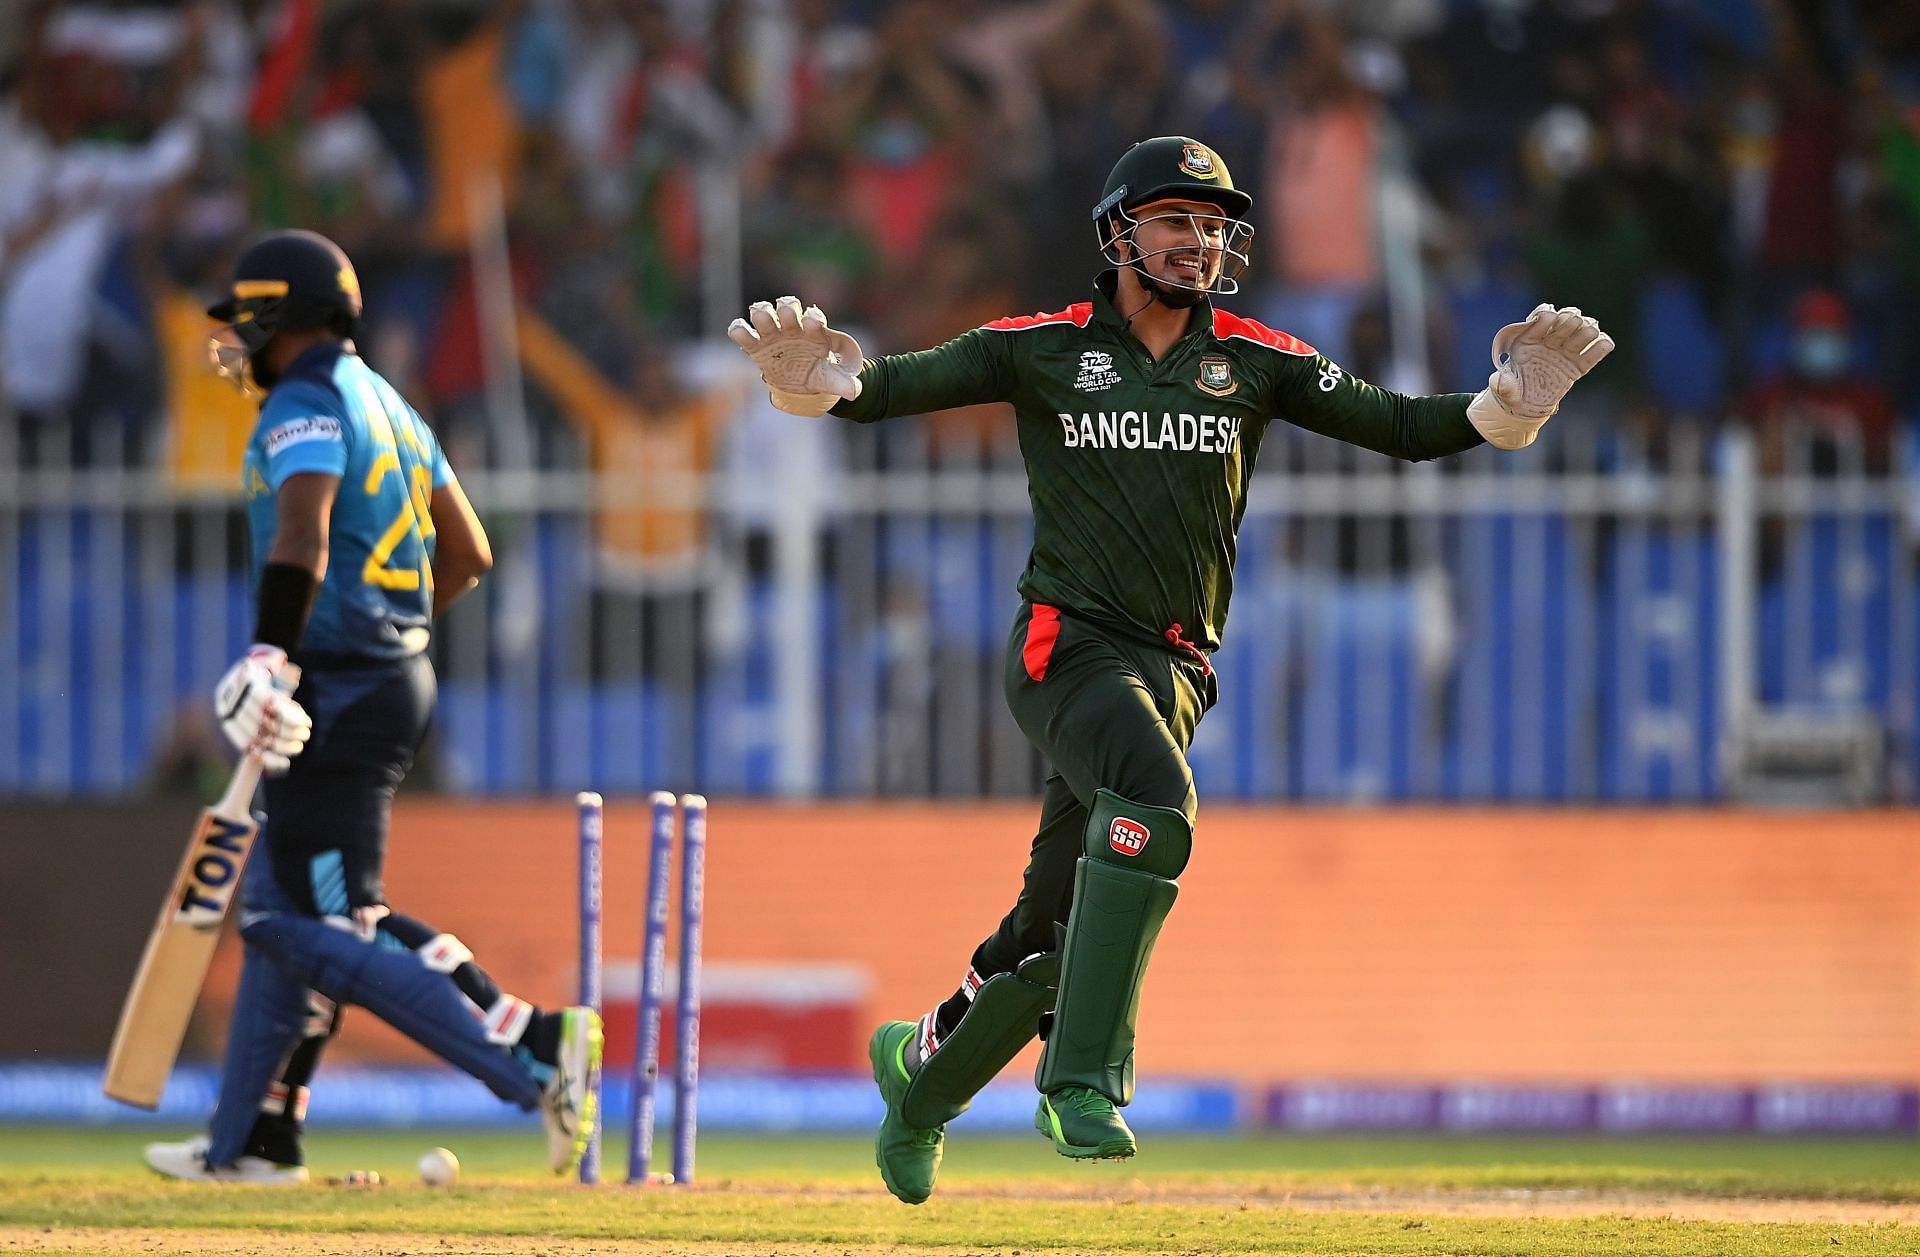 Nurul Hasan has played 33 T20I matches for Bangladesh (Image Courtesy: Getty)